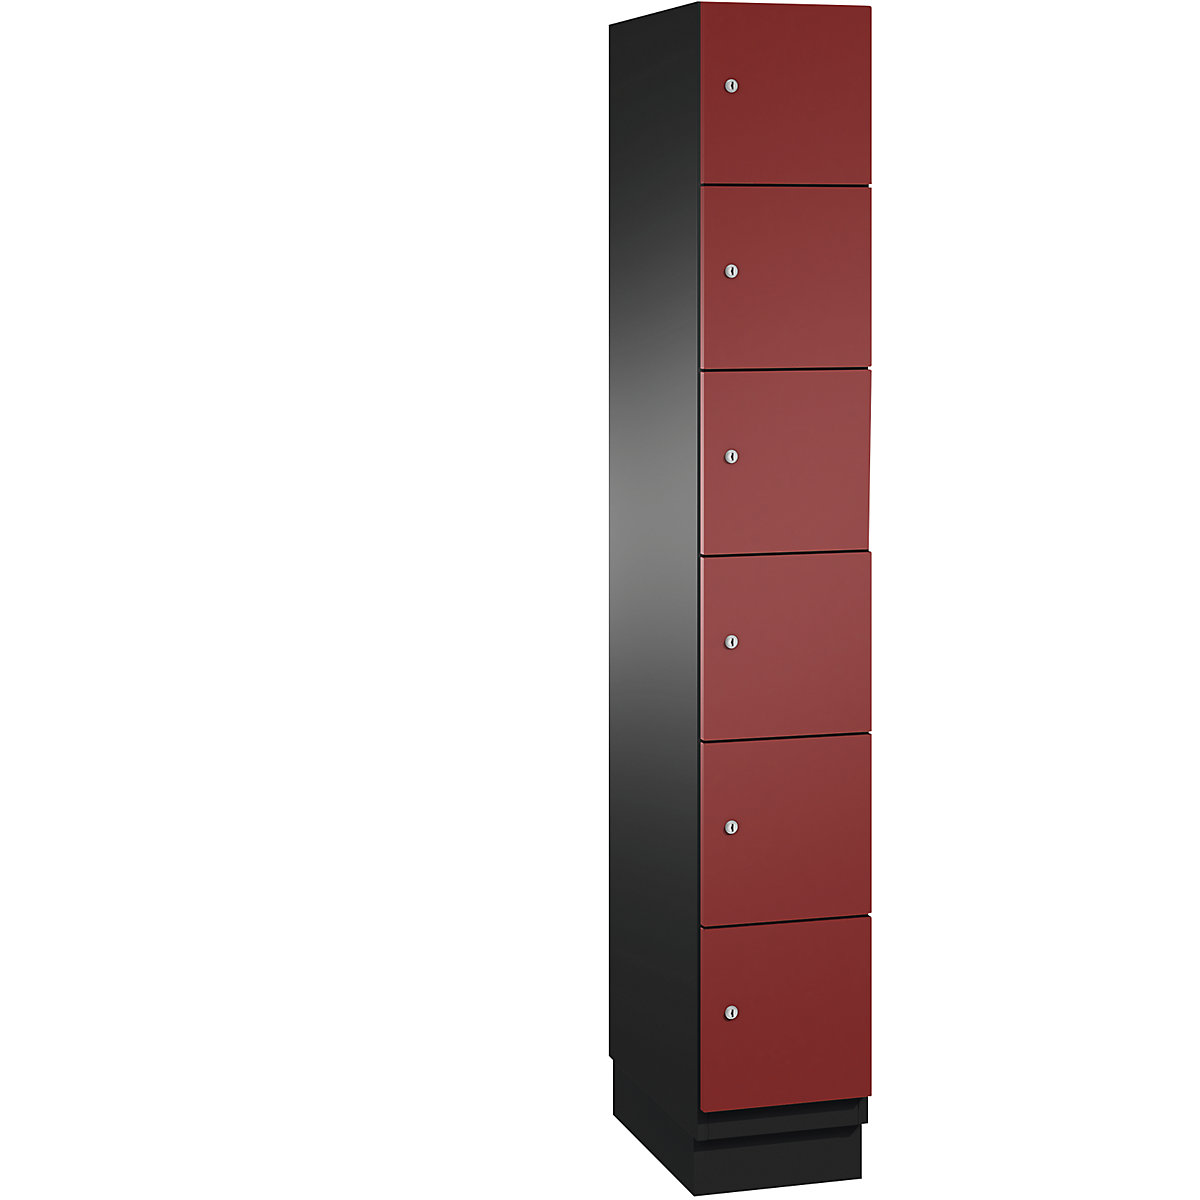 CAMBIO compartment locker with sheet steel doors – C+P, 6 compartments, width 300 mm, body black grey / door ruby red-9